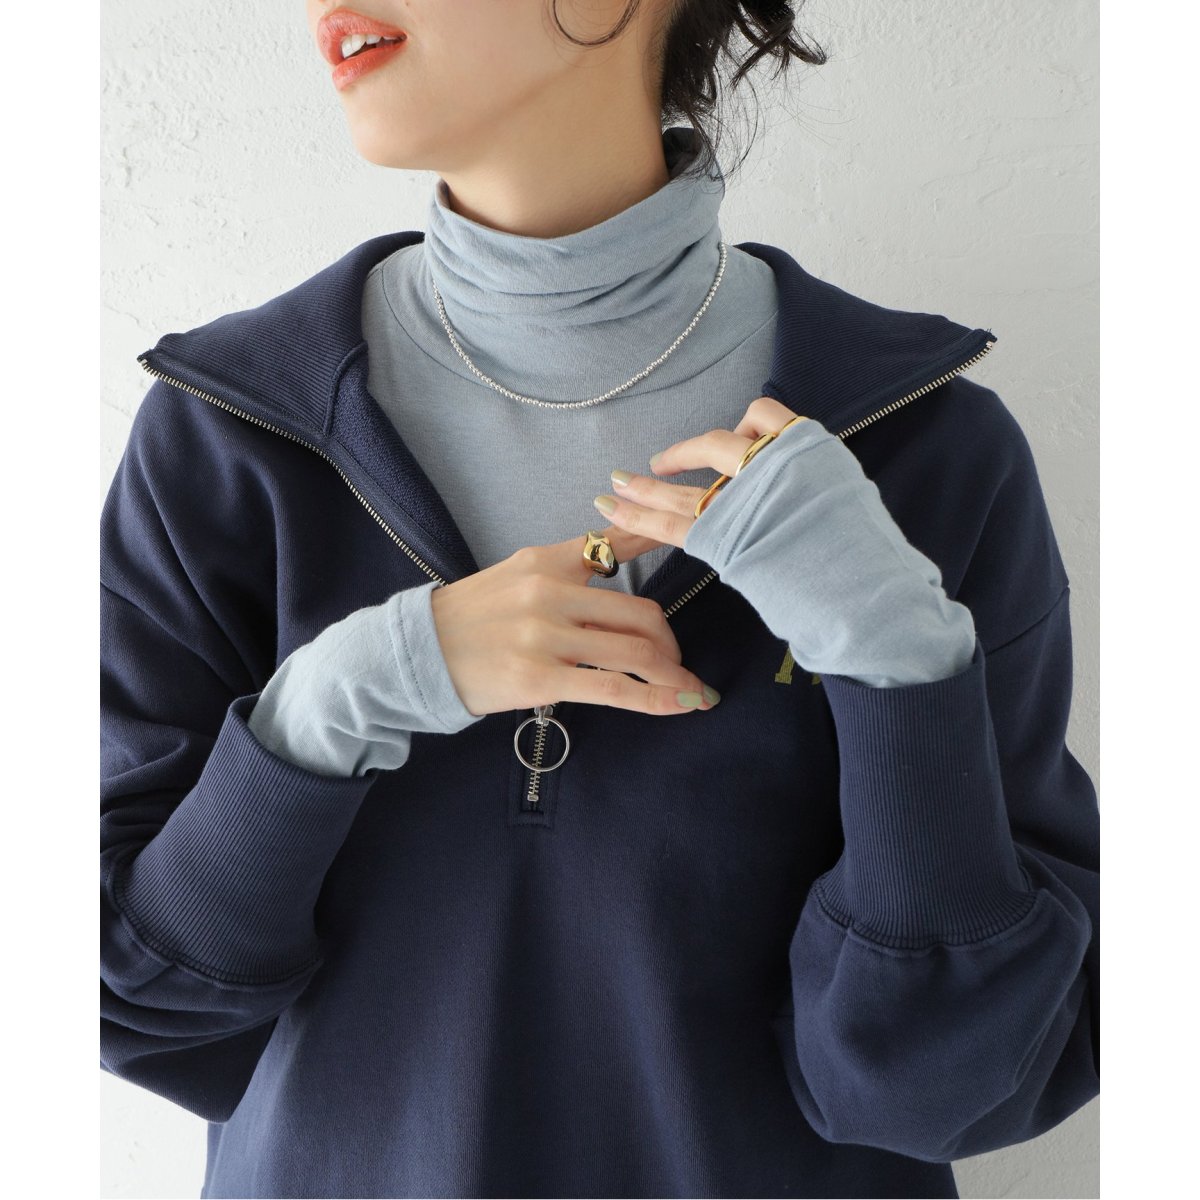 MIJEONG PARK/ミジョン・パーク】ROLL NECK JERSEY TOP：カットソー